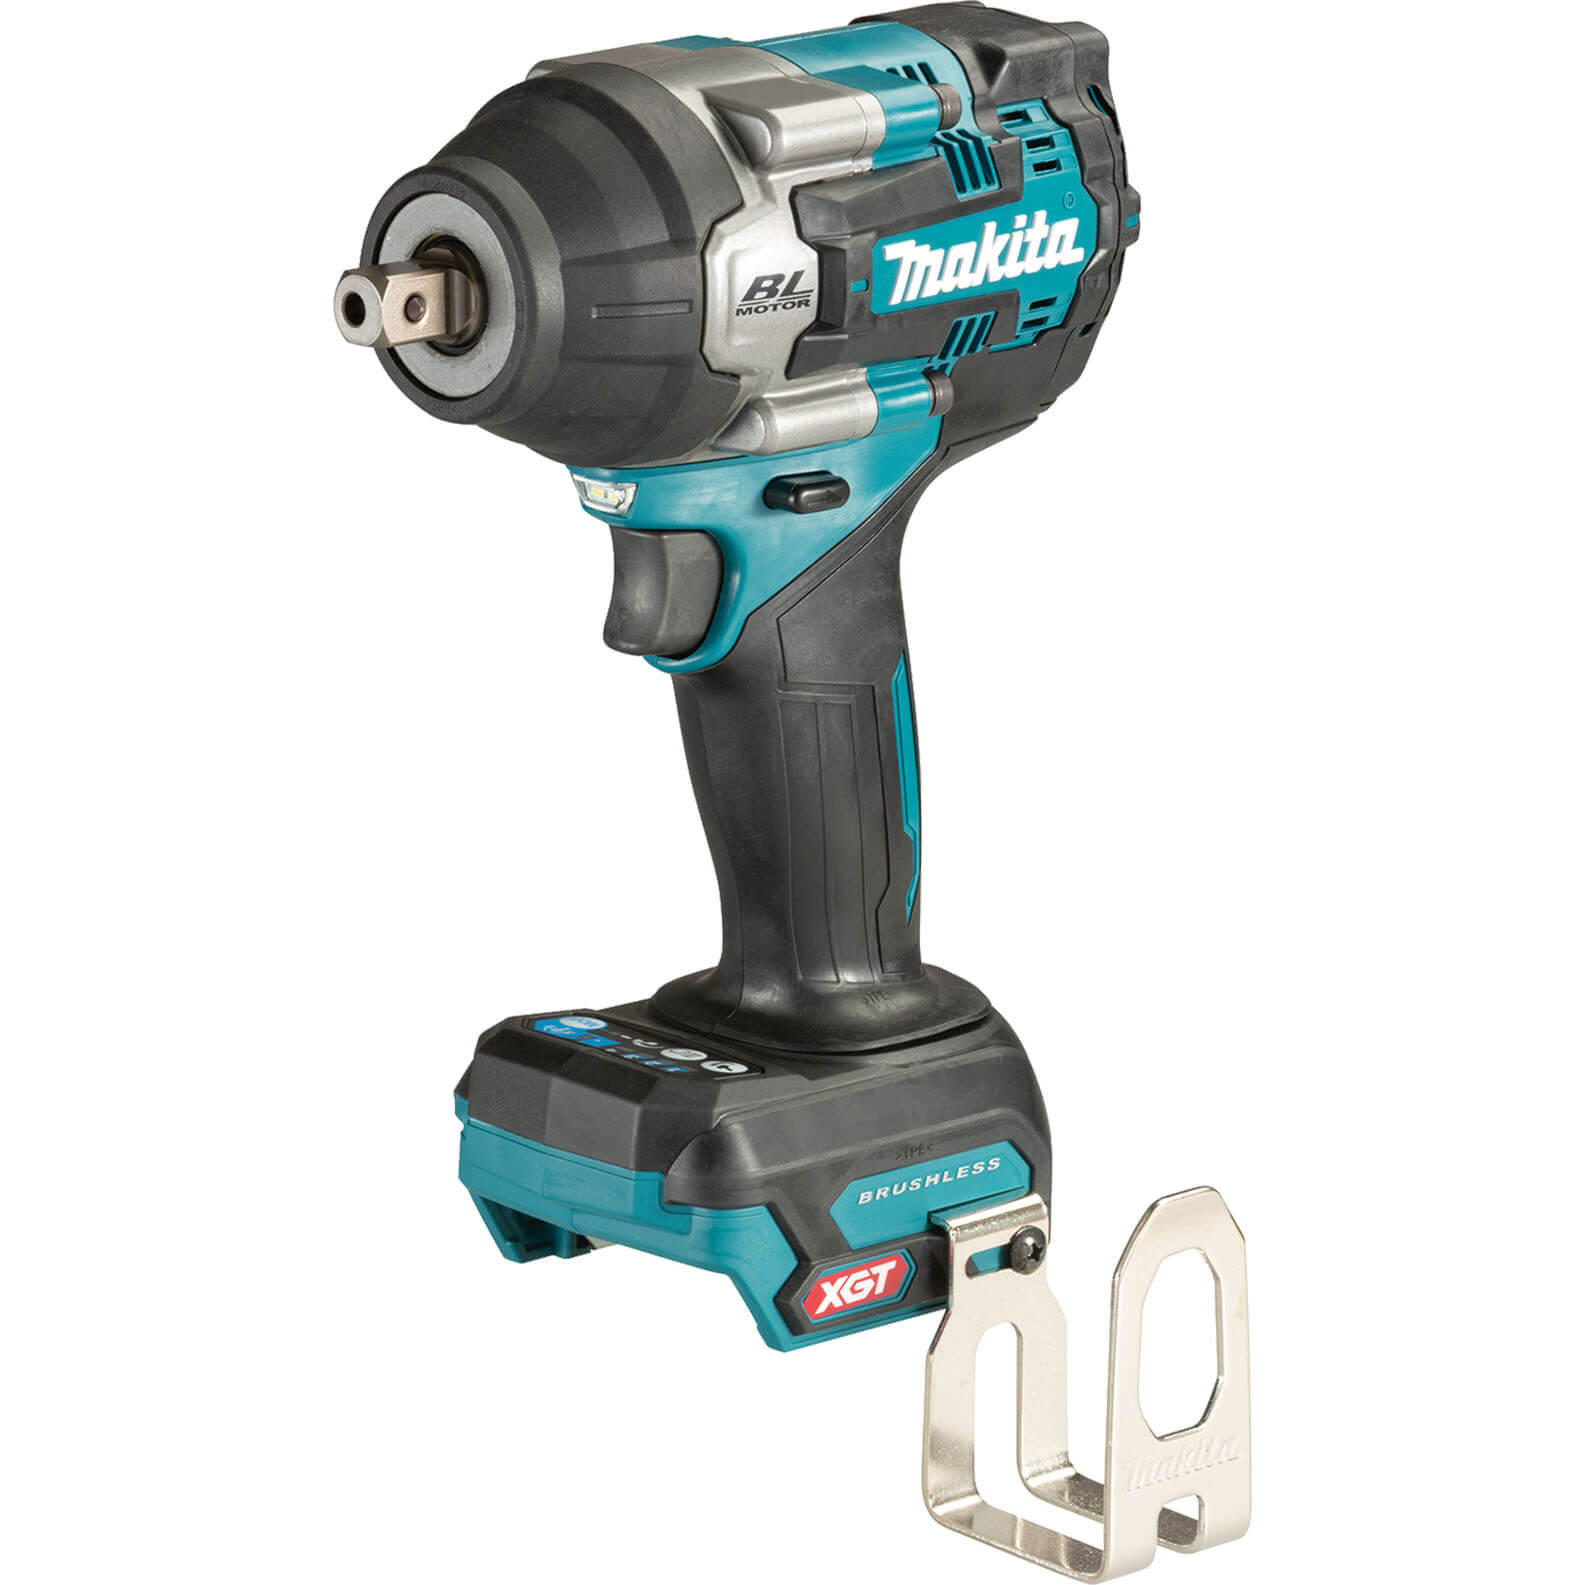 Photo of Makita Tw008g 40v Max Xgt Cordless Brushless Impact Wrench No Batteries No Charger No Case